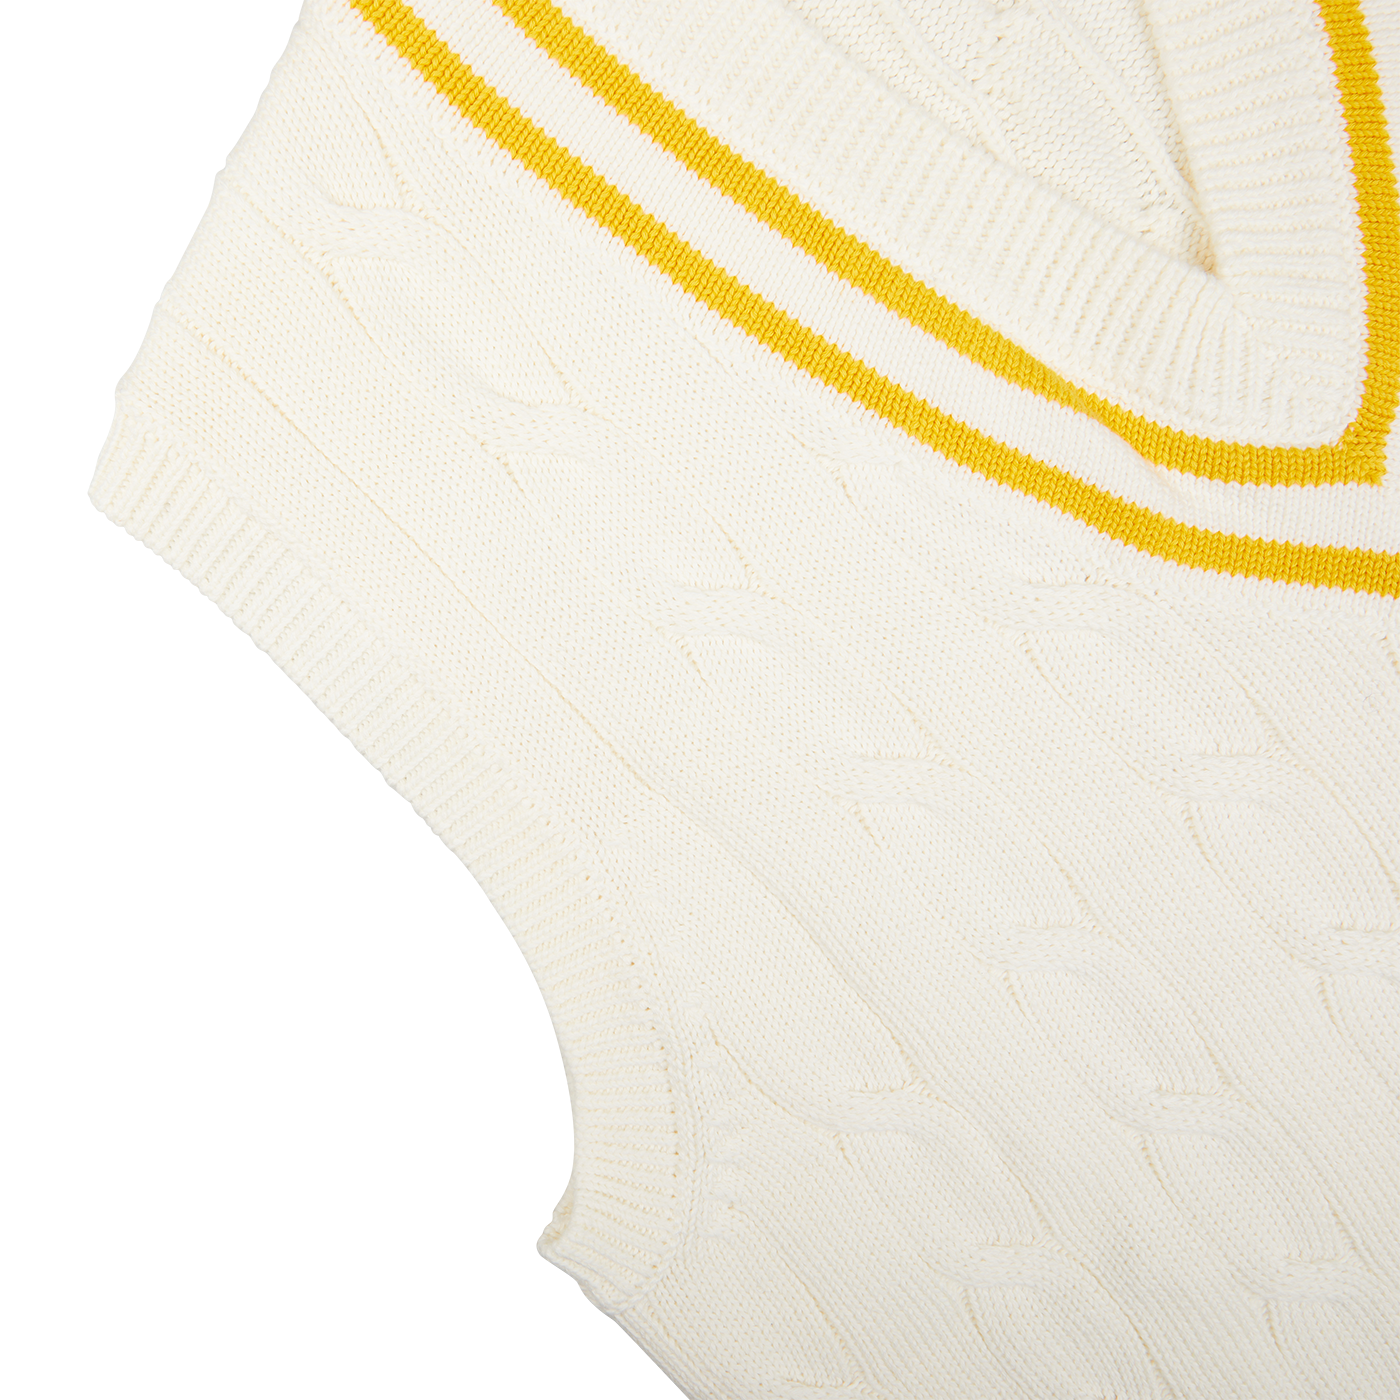 Off-White Yellow Striped Cotton Cricket Slipover by Alan Paine